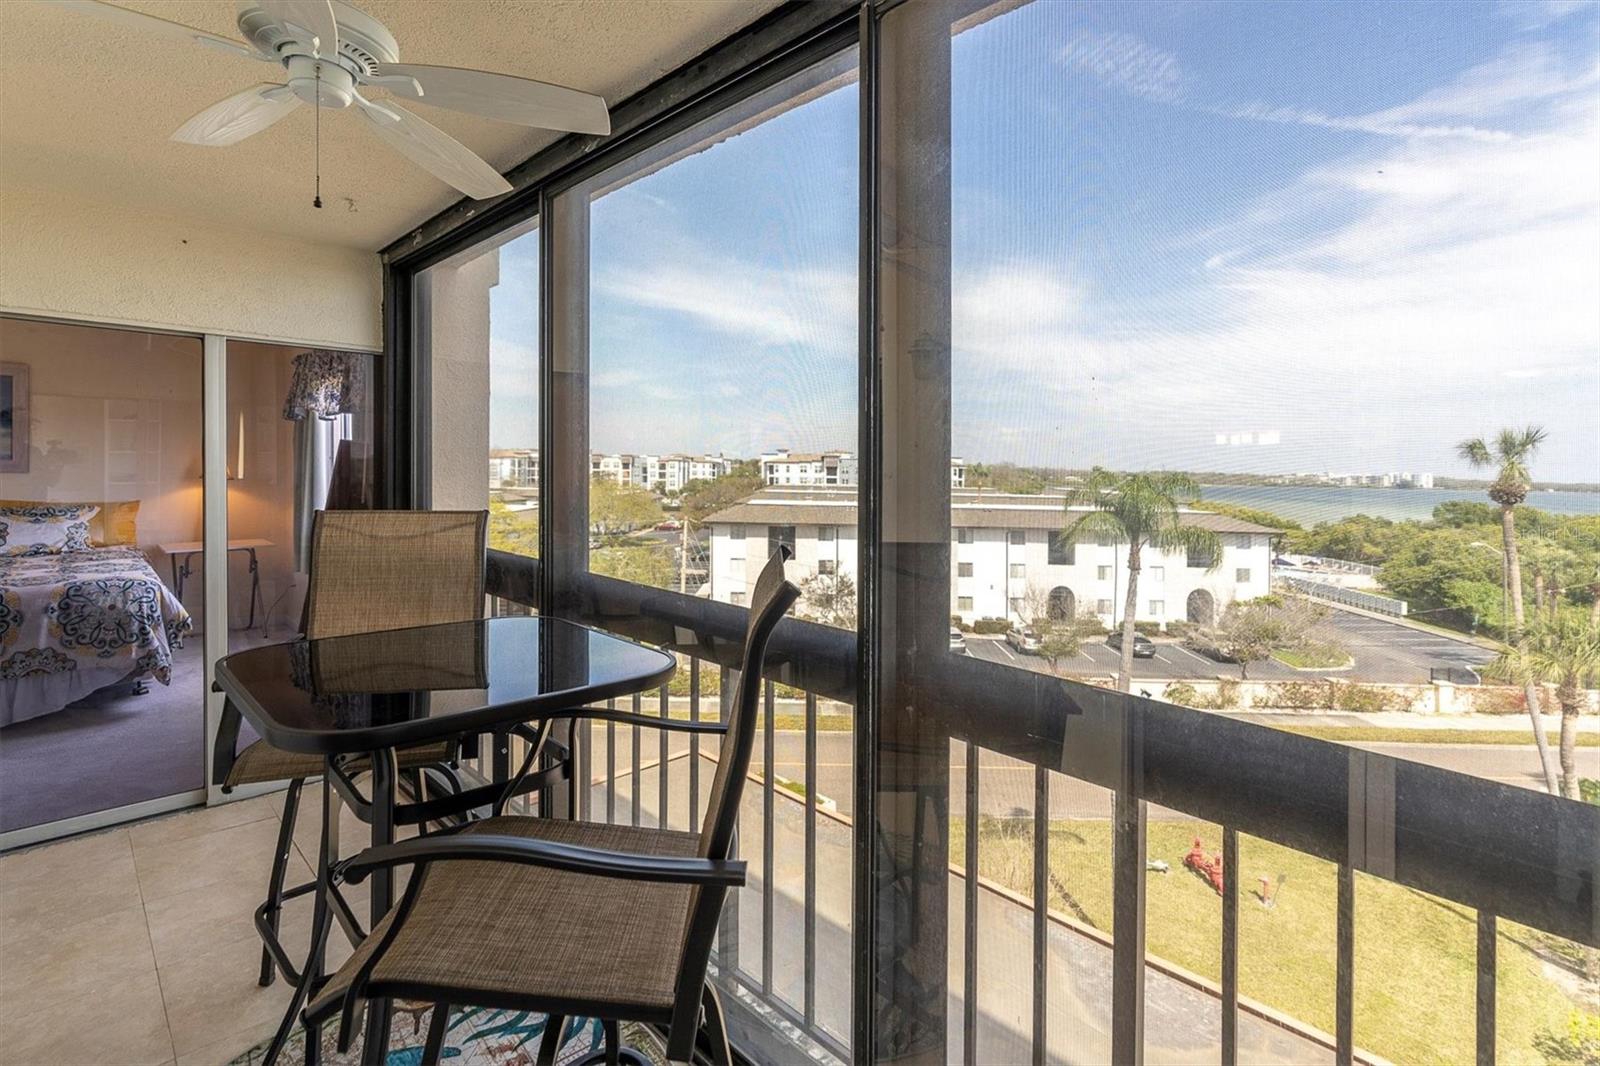 Balcony with view of Tampa Bay and showing entrance to primary bedroom